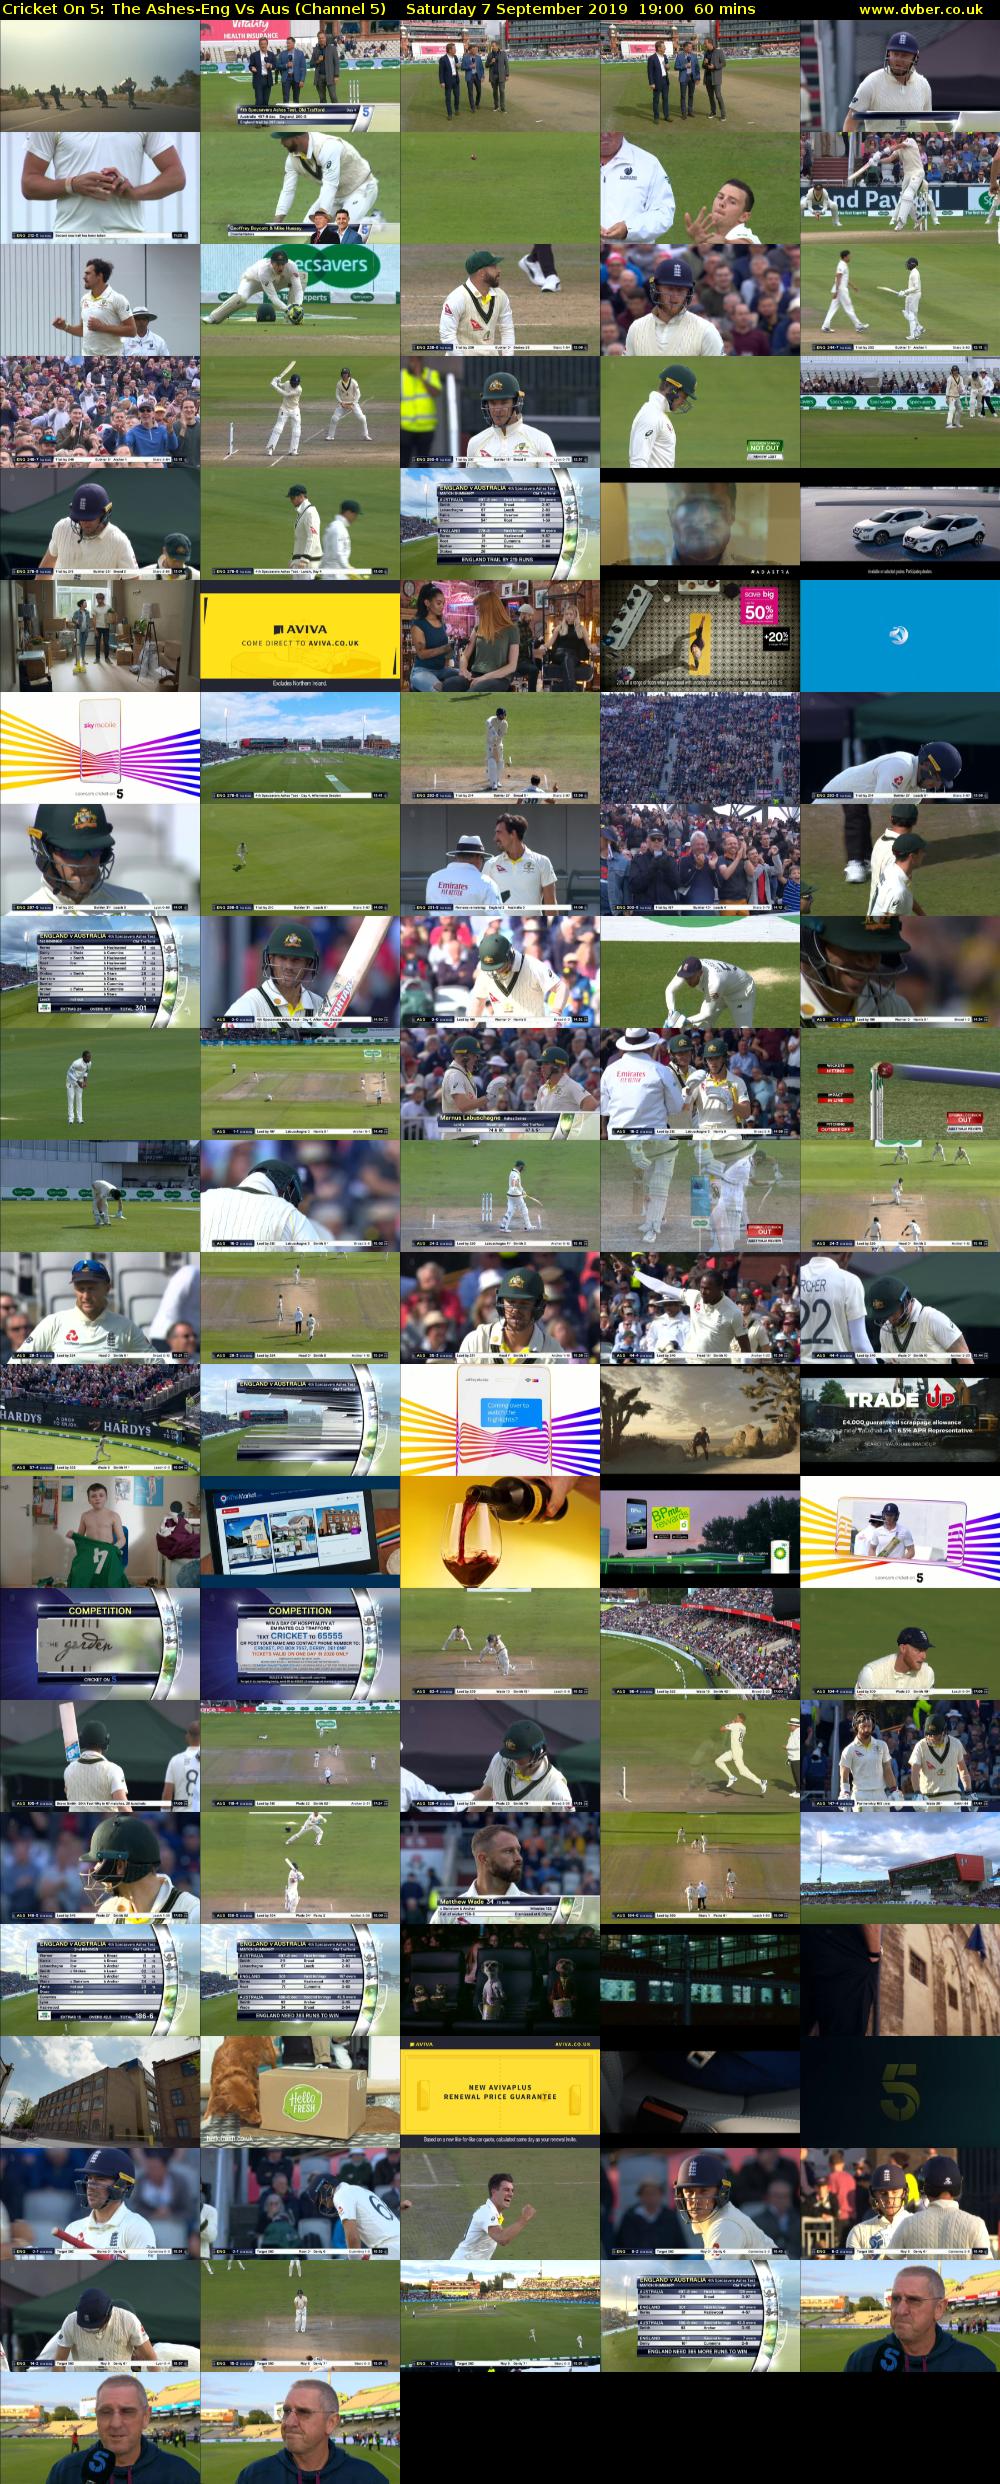 Cricket On 5: The Ashes-Eng Vs Aus (Channel 5) Saturday 7 September 2019 19:00 - 20:00